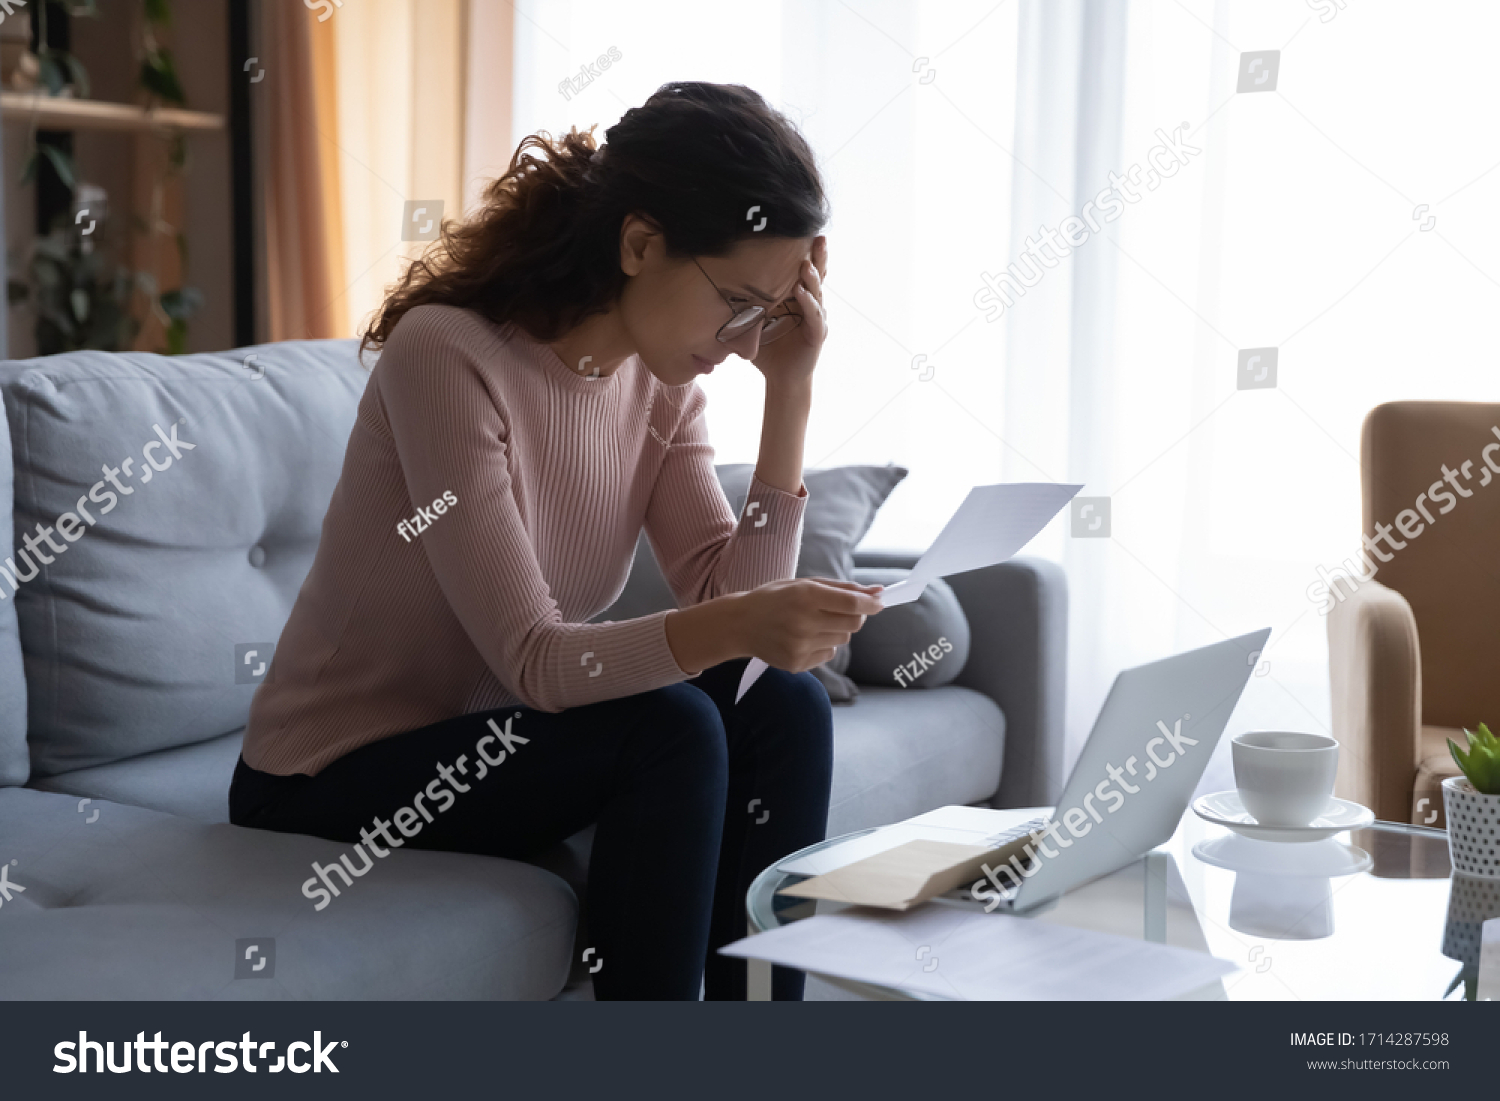 Frustrated desperate young woman in eyeglasses touching forehead, looking through banking credit termination, having financial problems, reading refusal document, feeling depressed alone at home. #1714287598